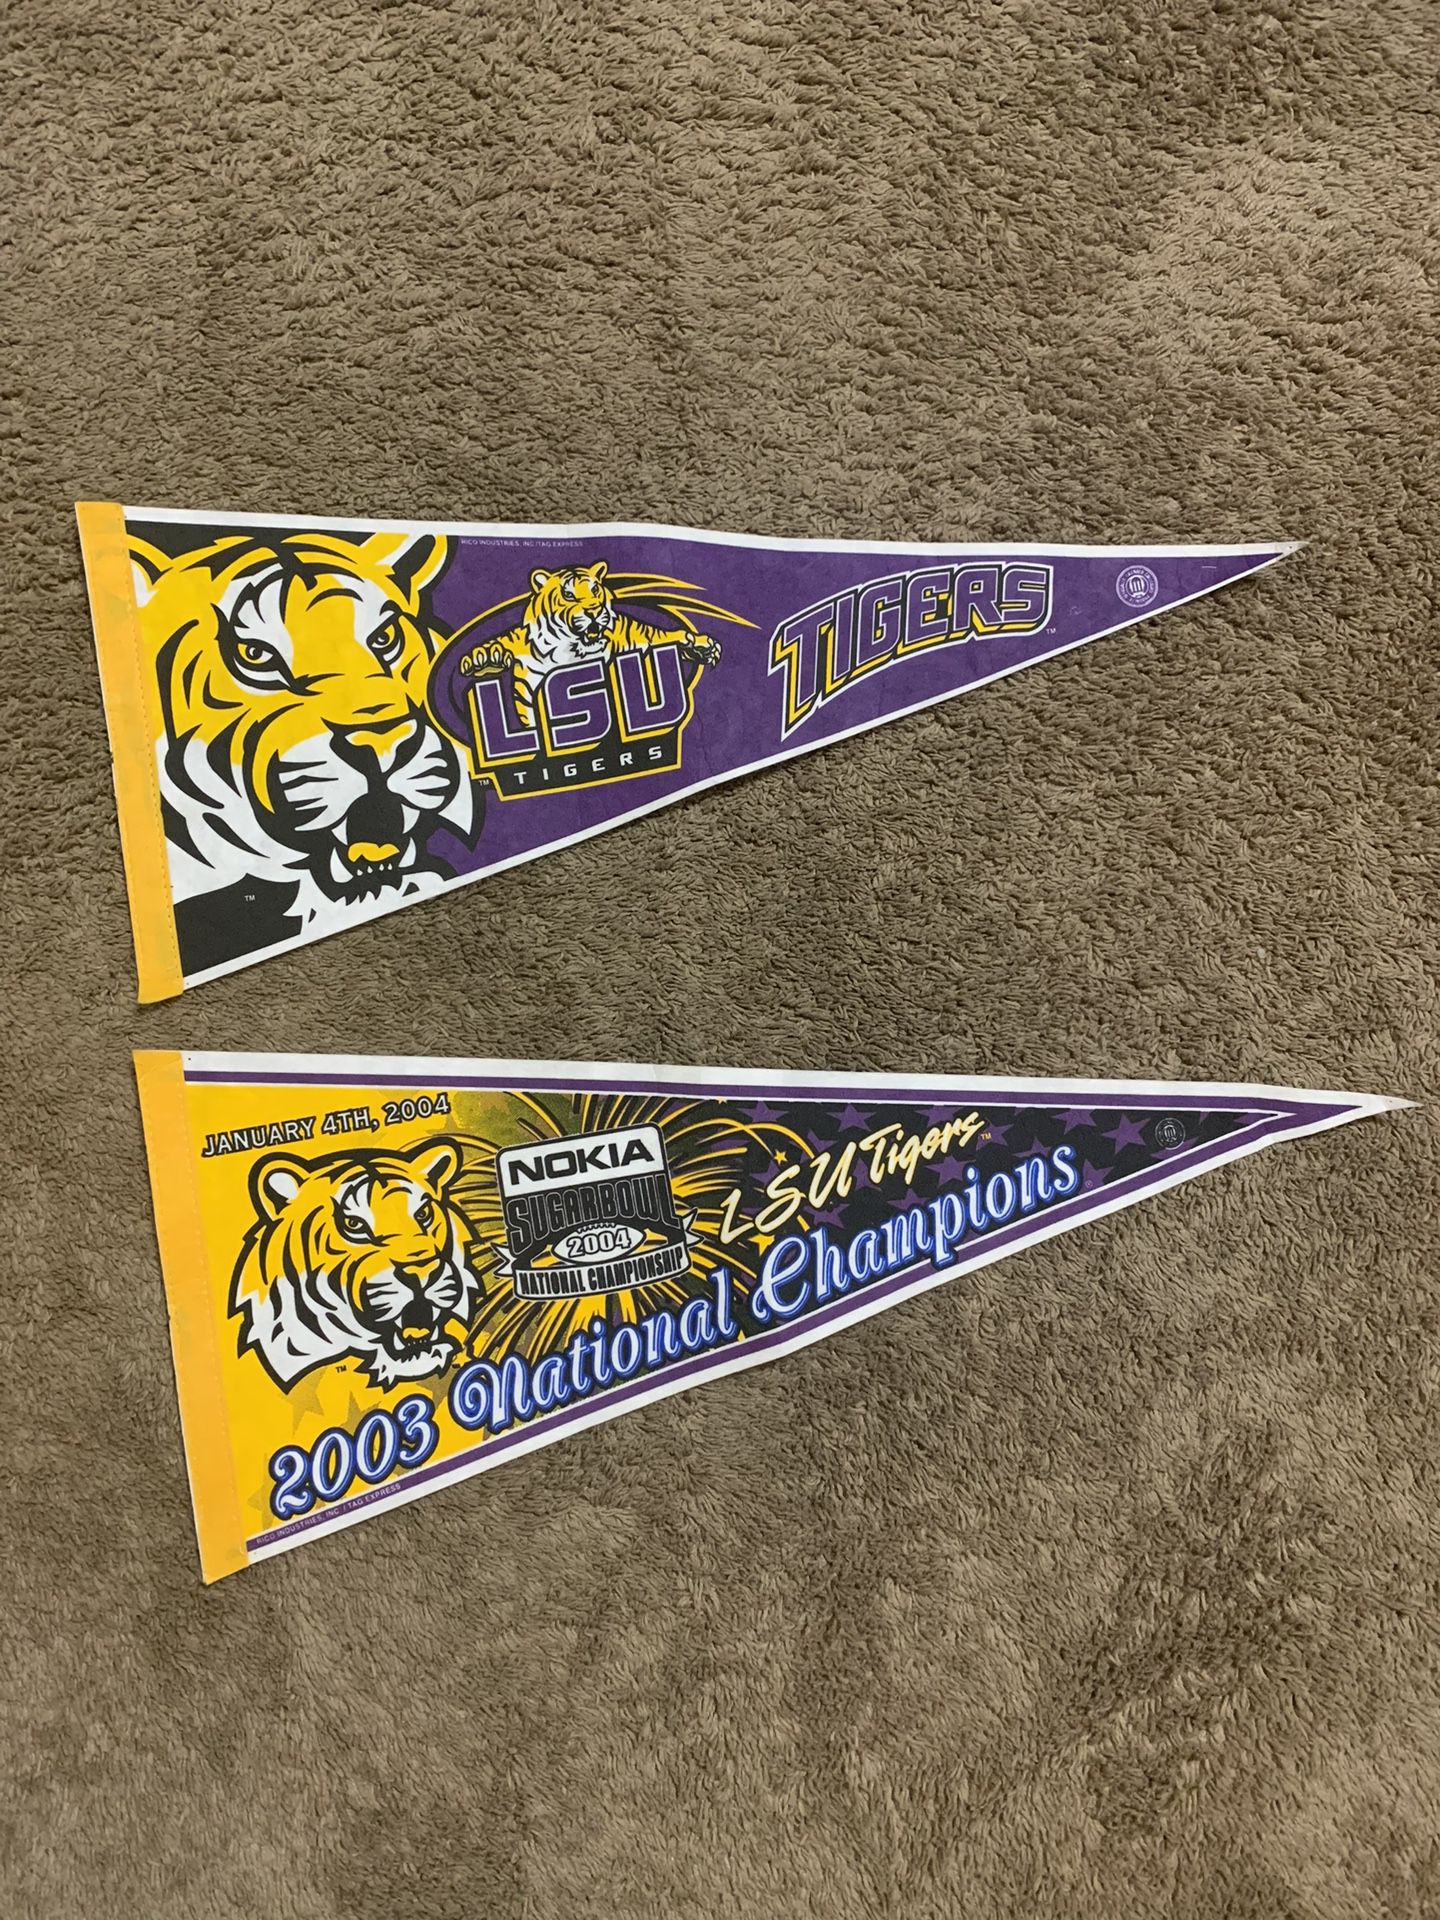 Vintage lsu pennant 00s for Sale in Richardson, TX - OfferUp